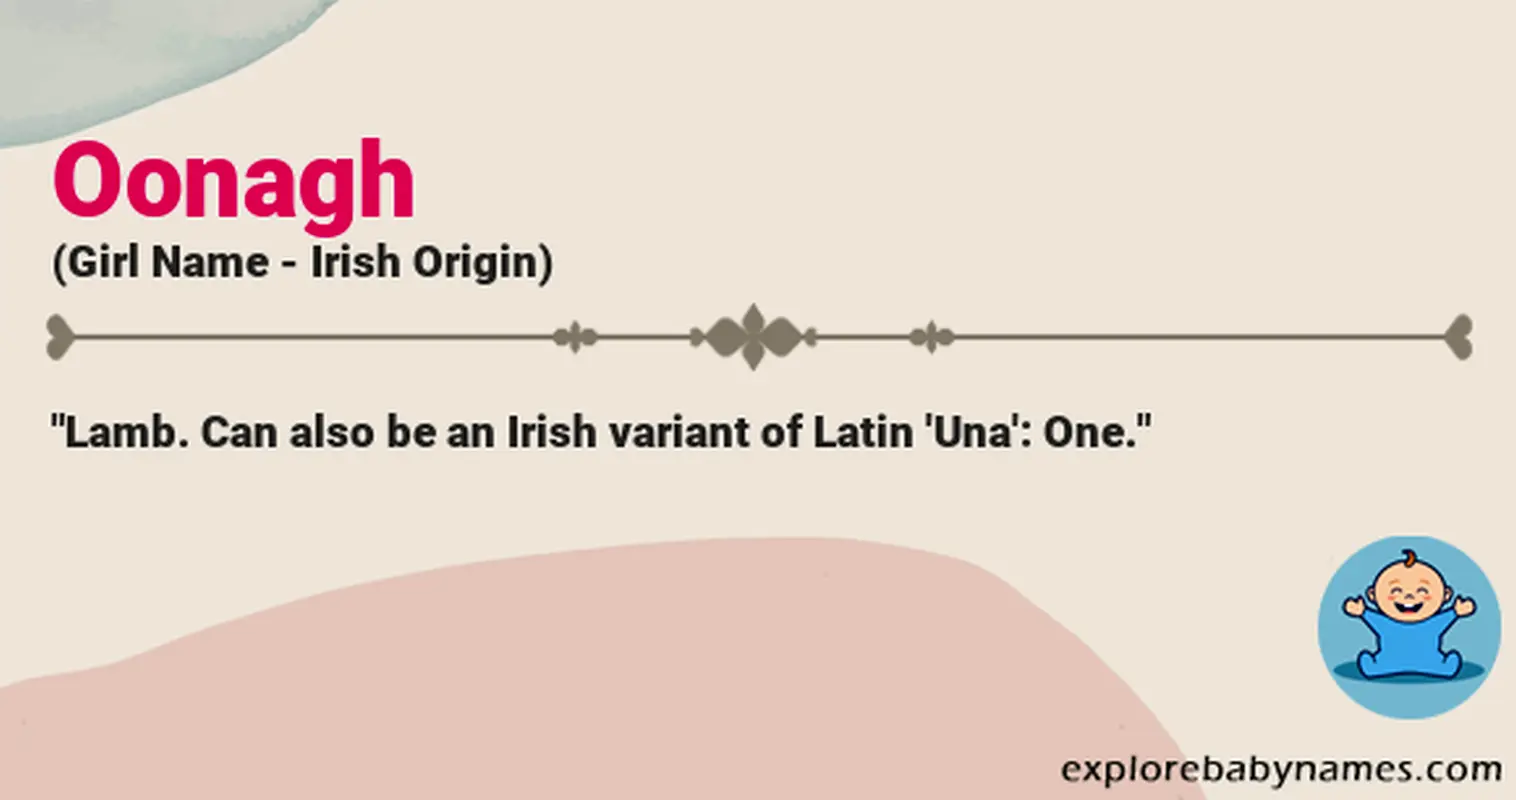 Meaning of Oonagh